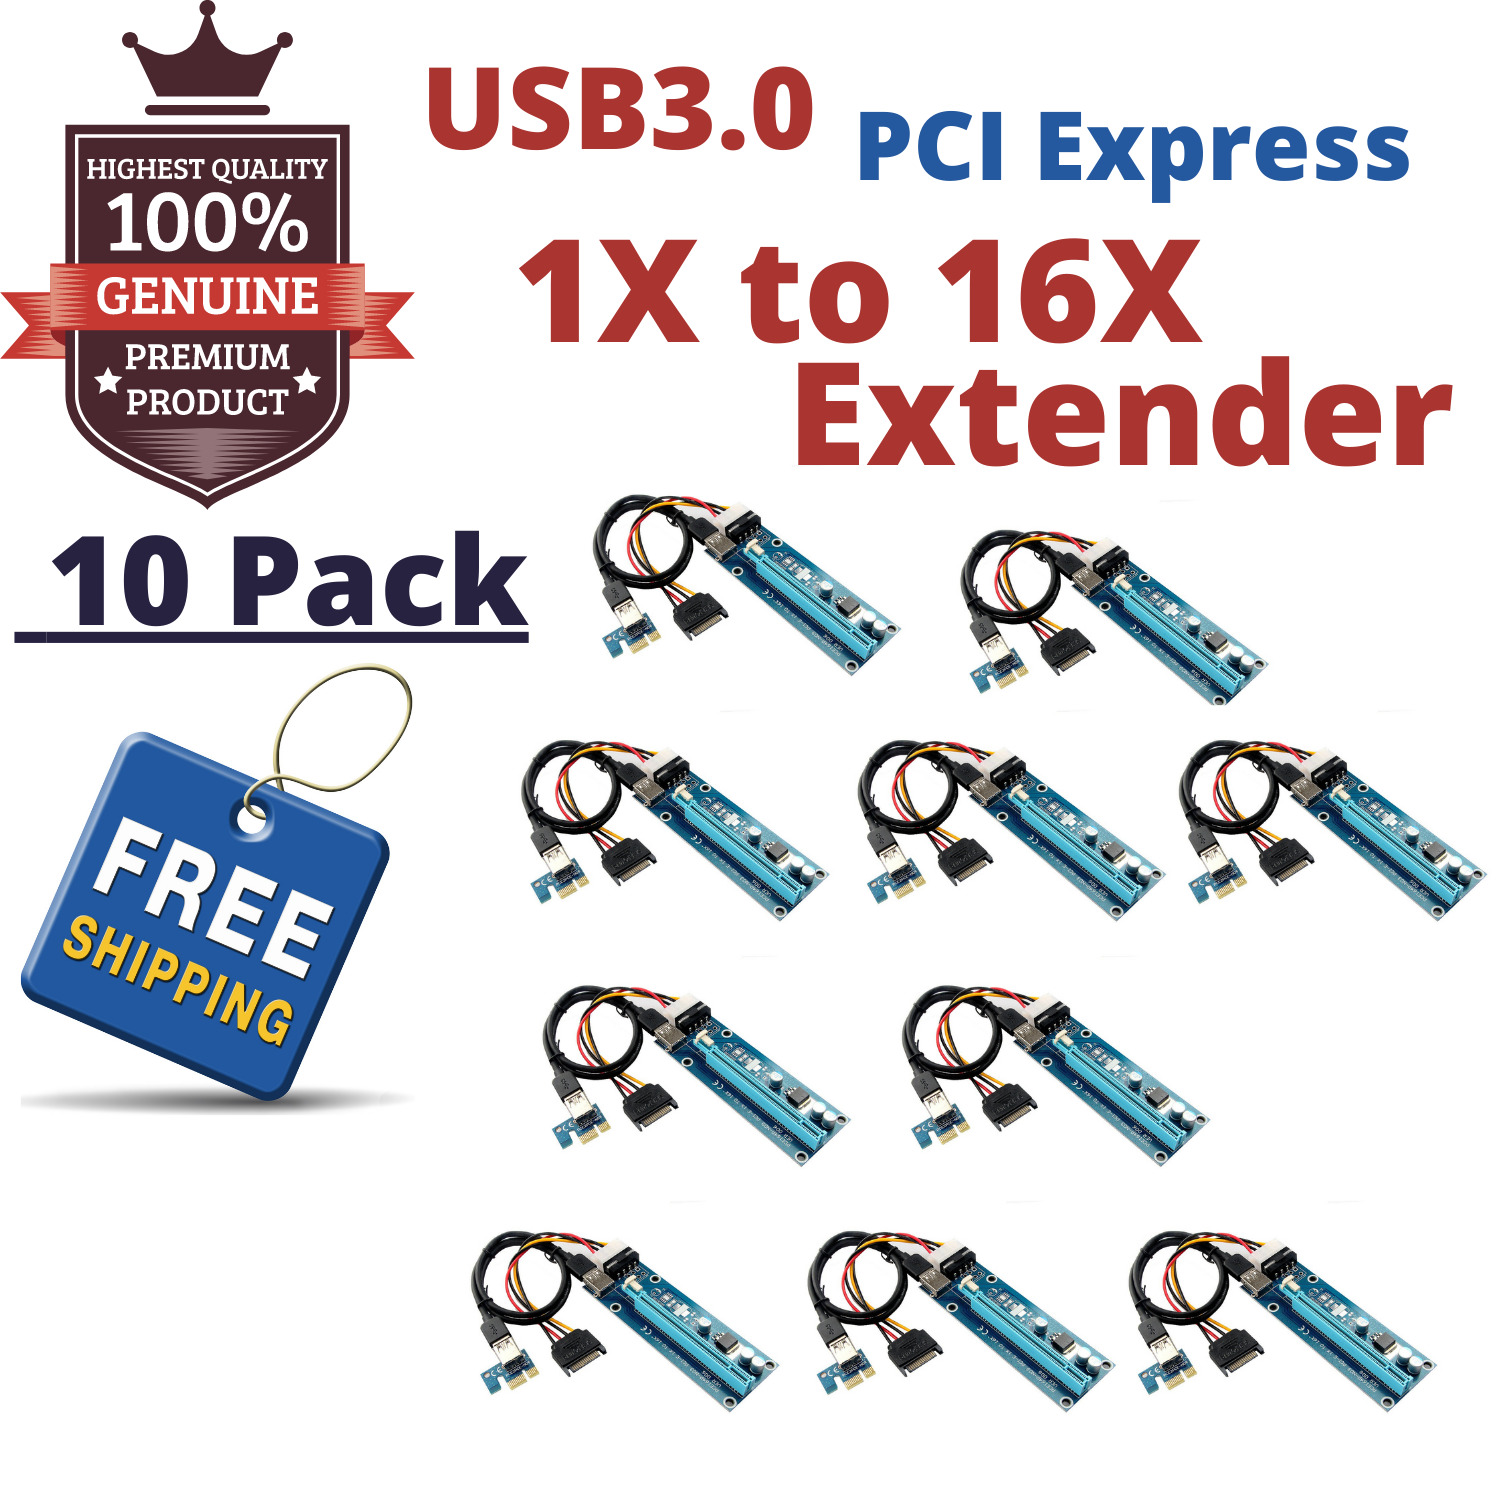 10Pack PCI-E Graphics Card Riser PCI Express 1X to 16X Extender for GPU Miner BT